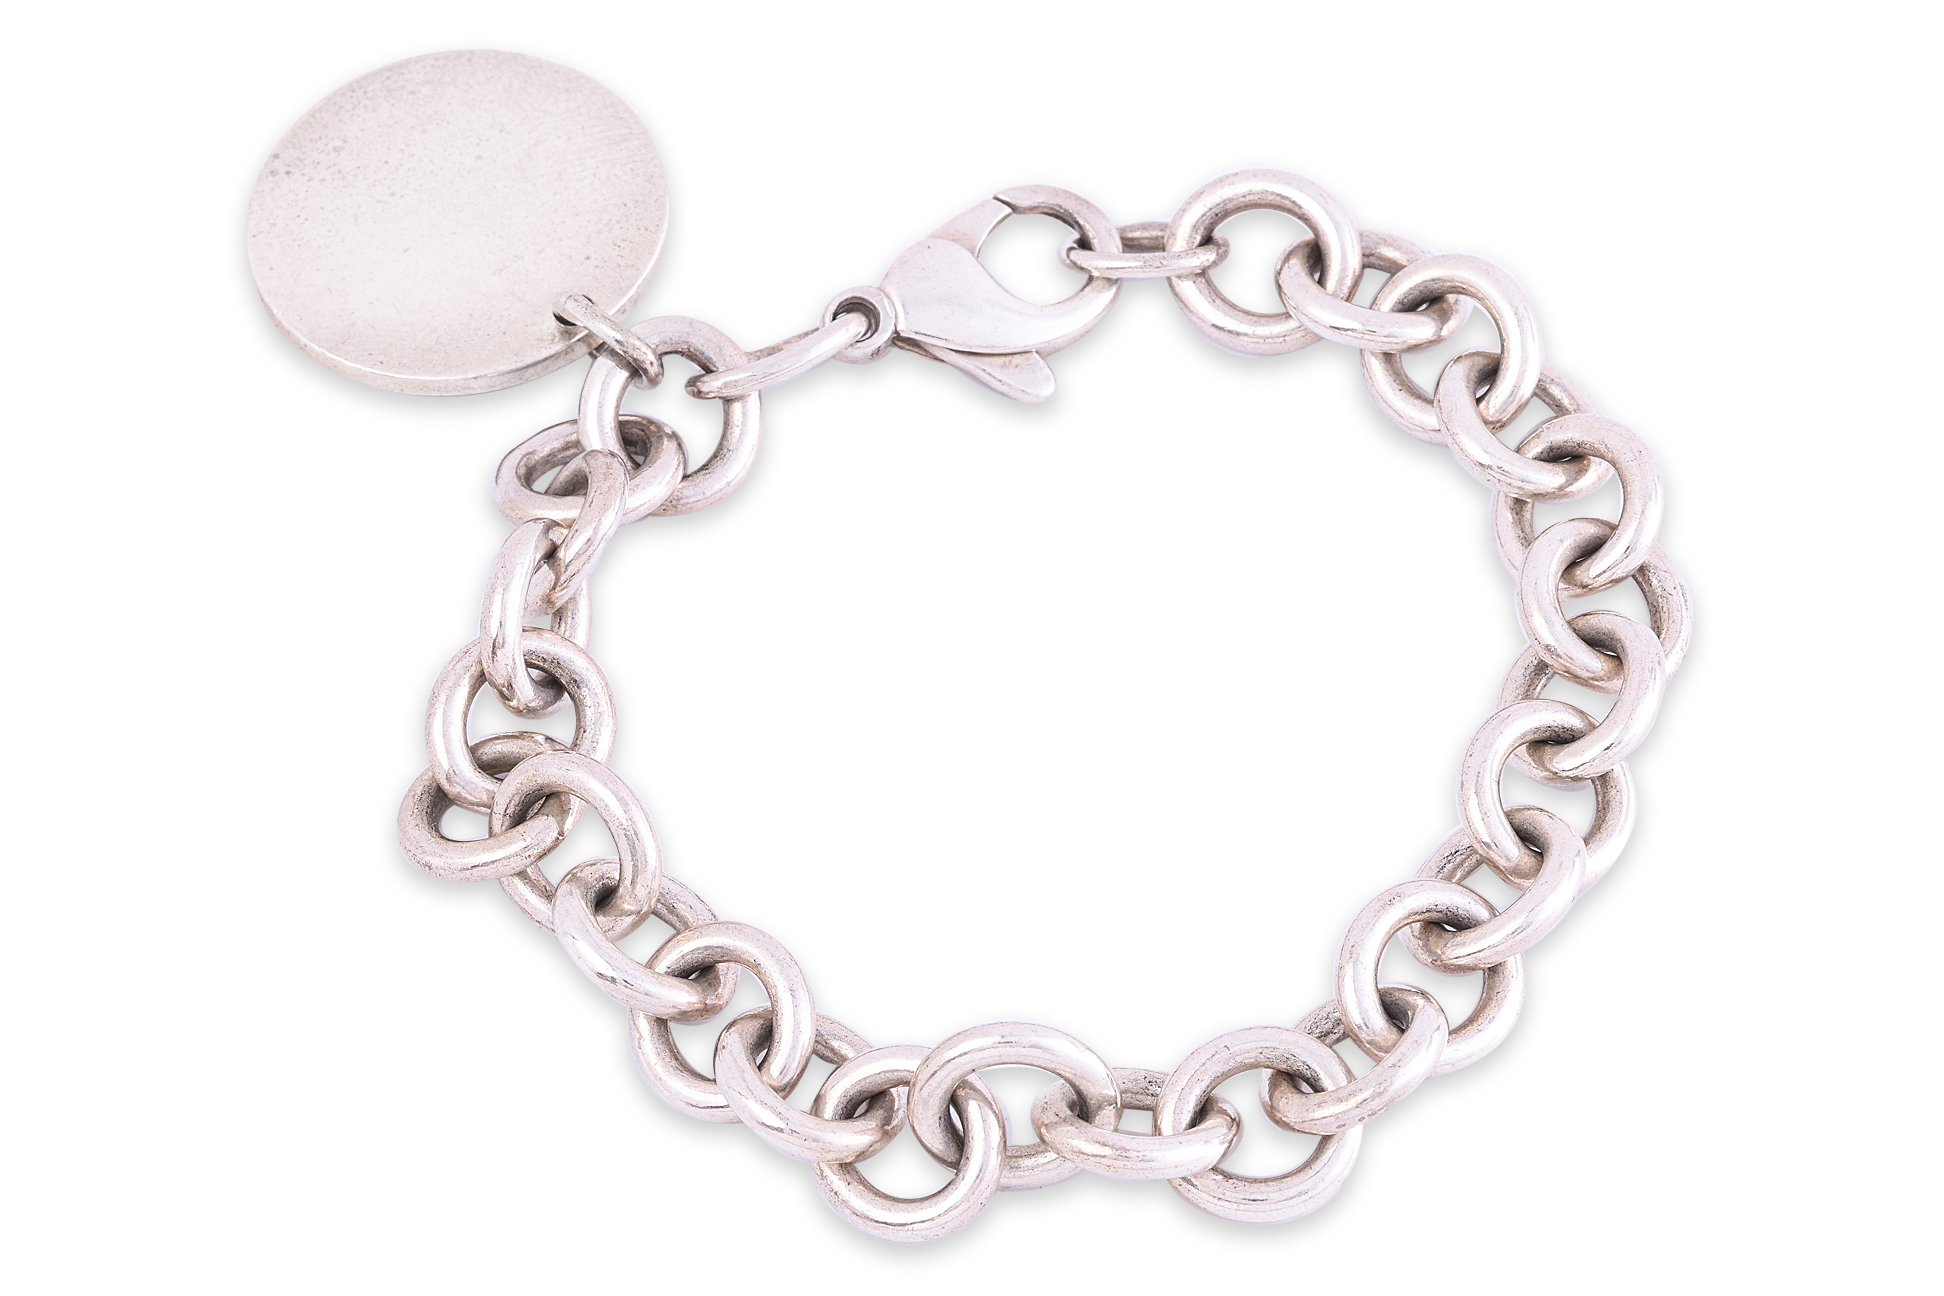 A TIFFANY & CO. SILVER ROUND TAG CHARM BRACELET - Image 2 of 2